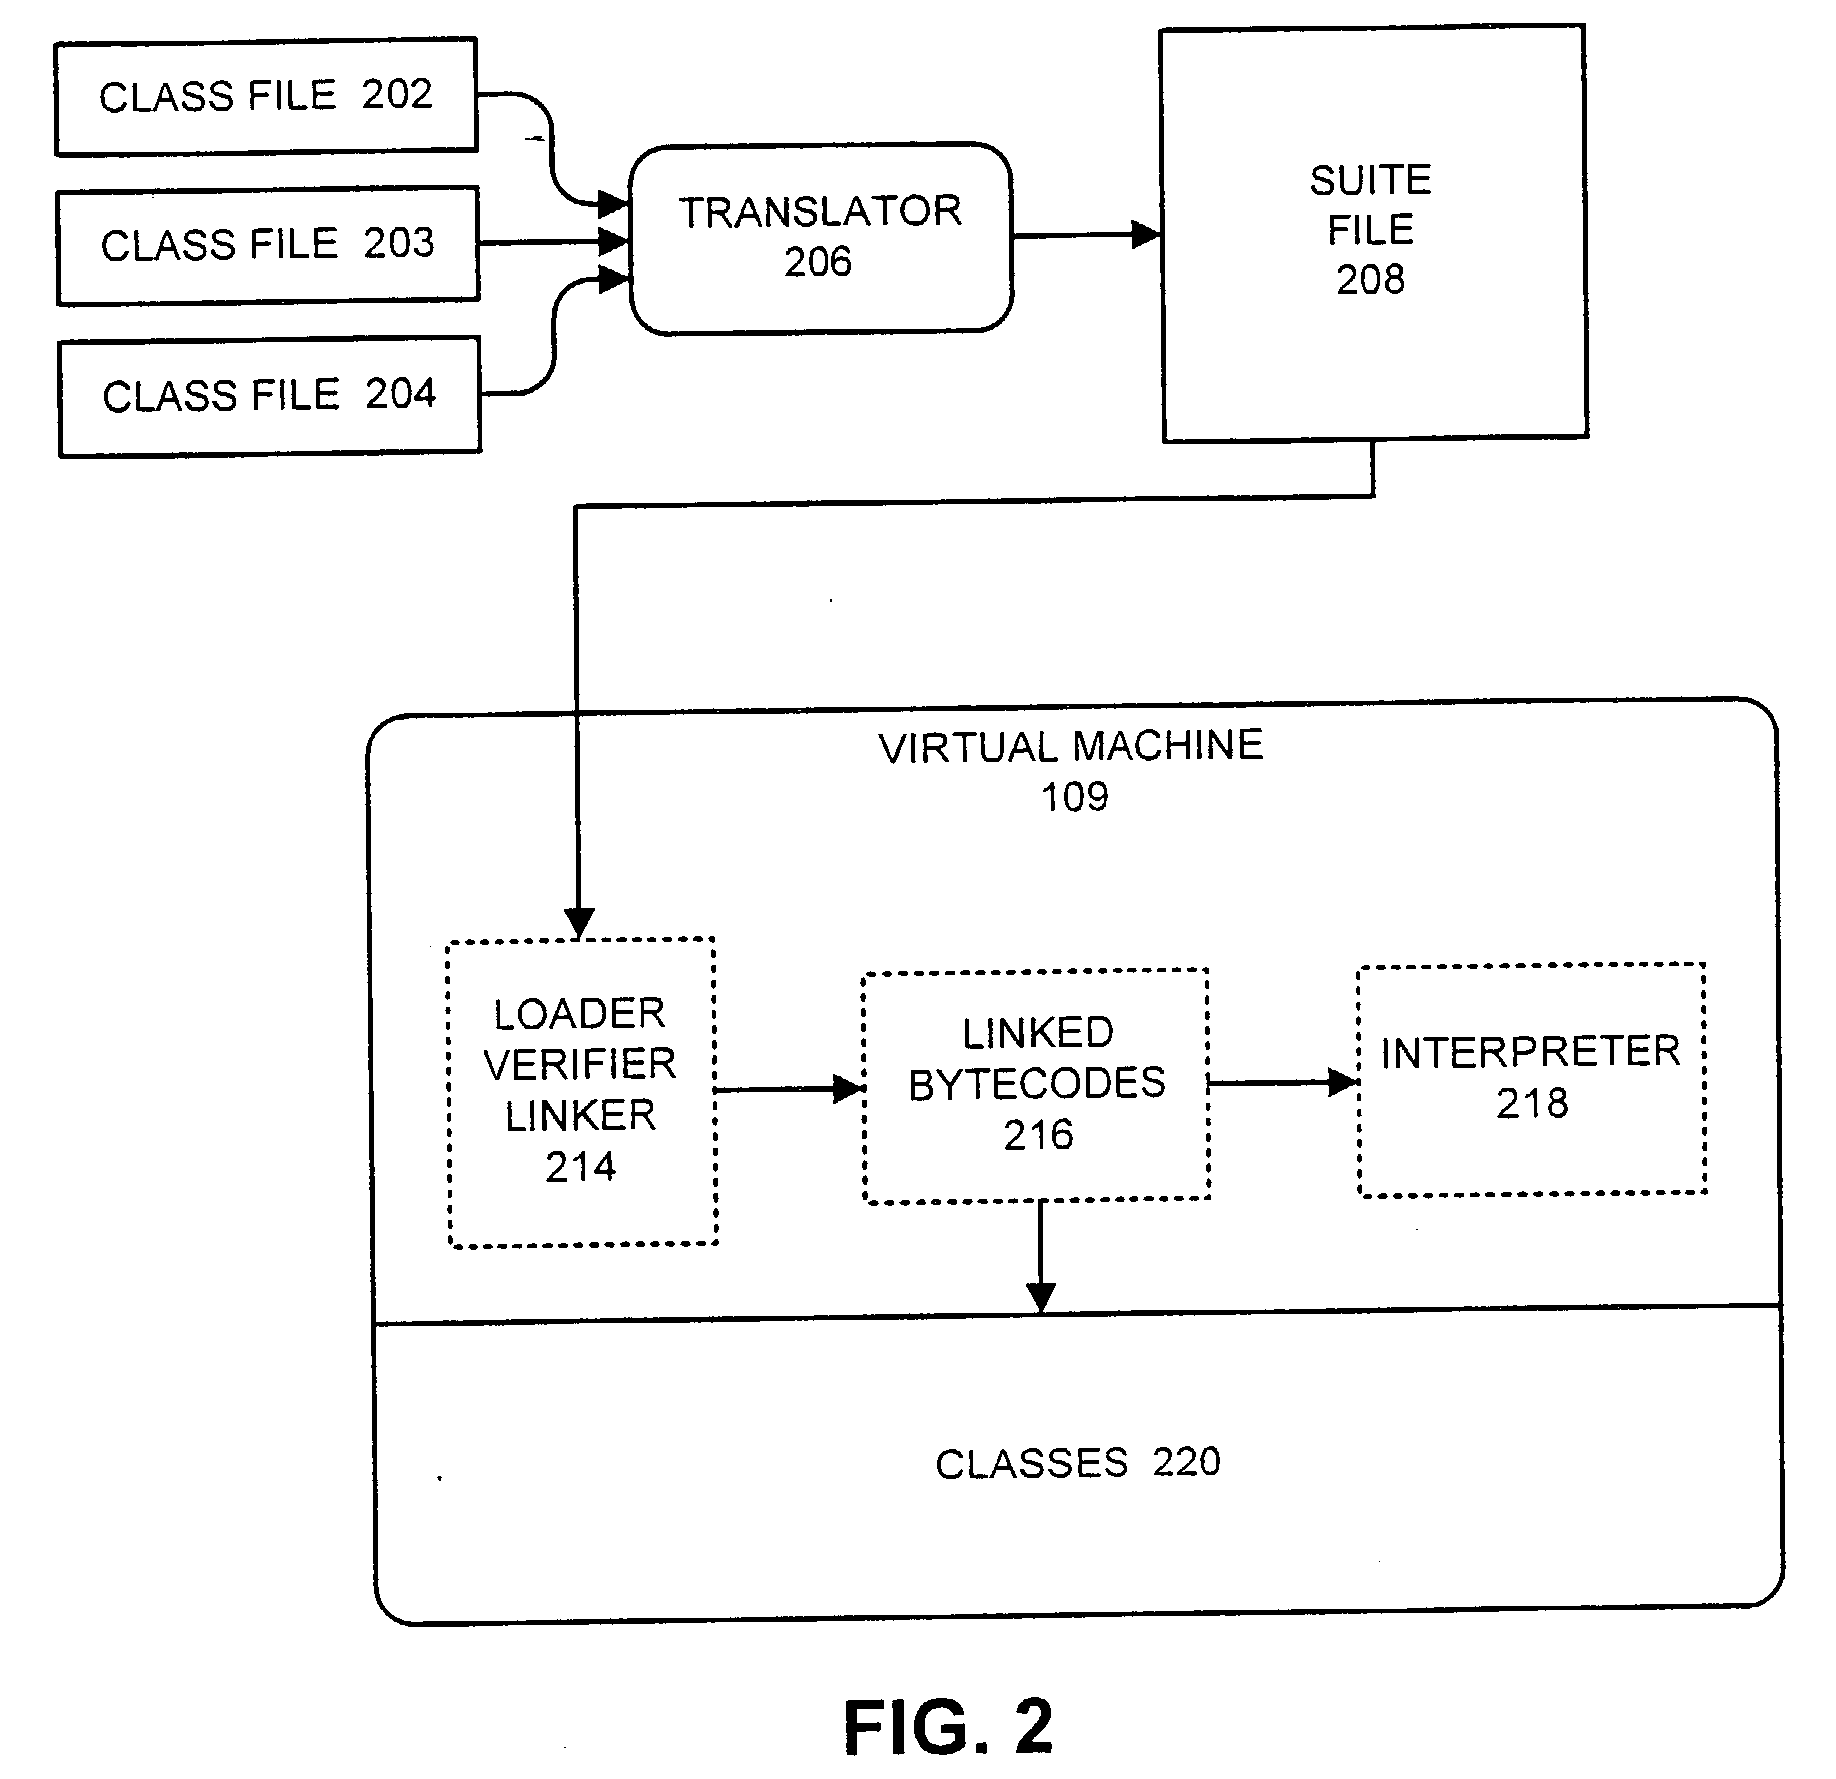 Method and apparatus for converting a synchronized method into a non-synchronized method